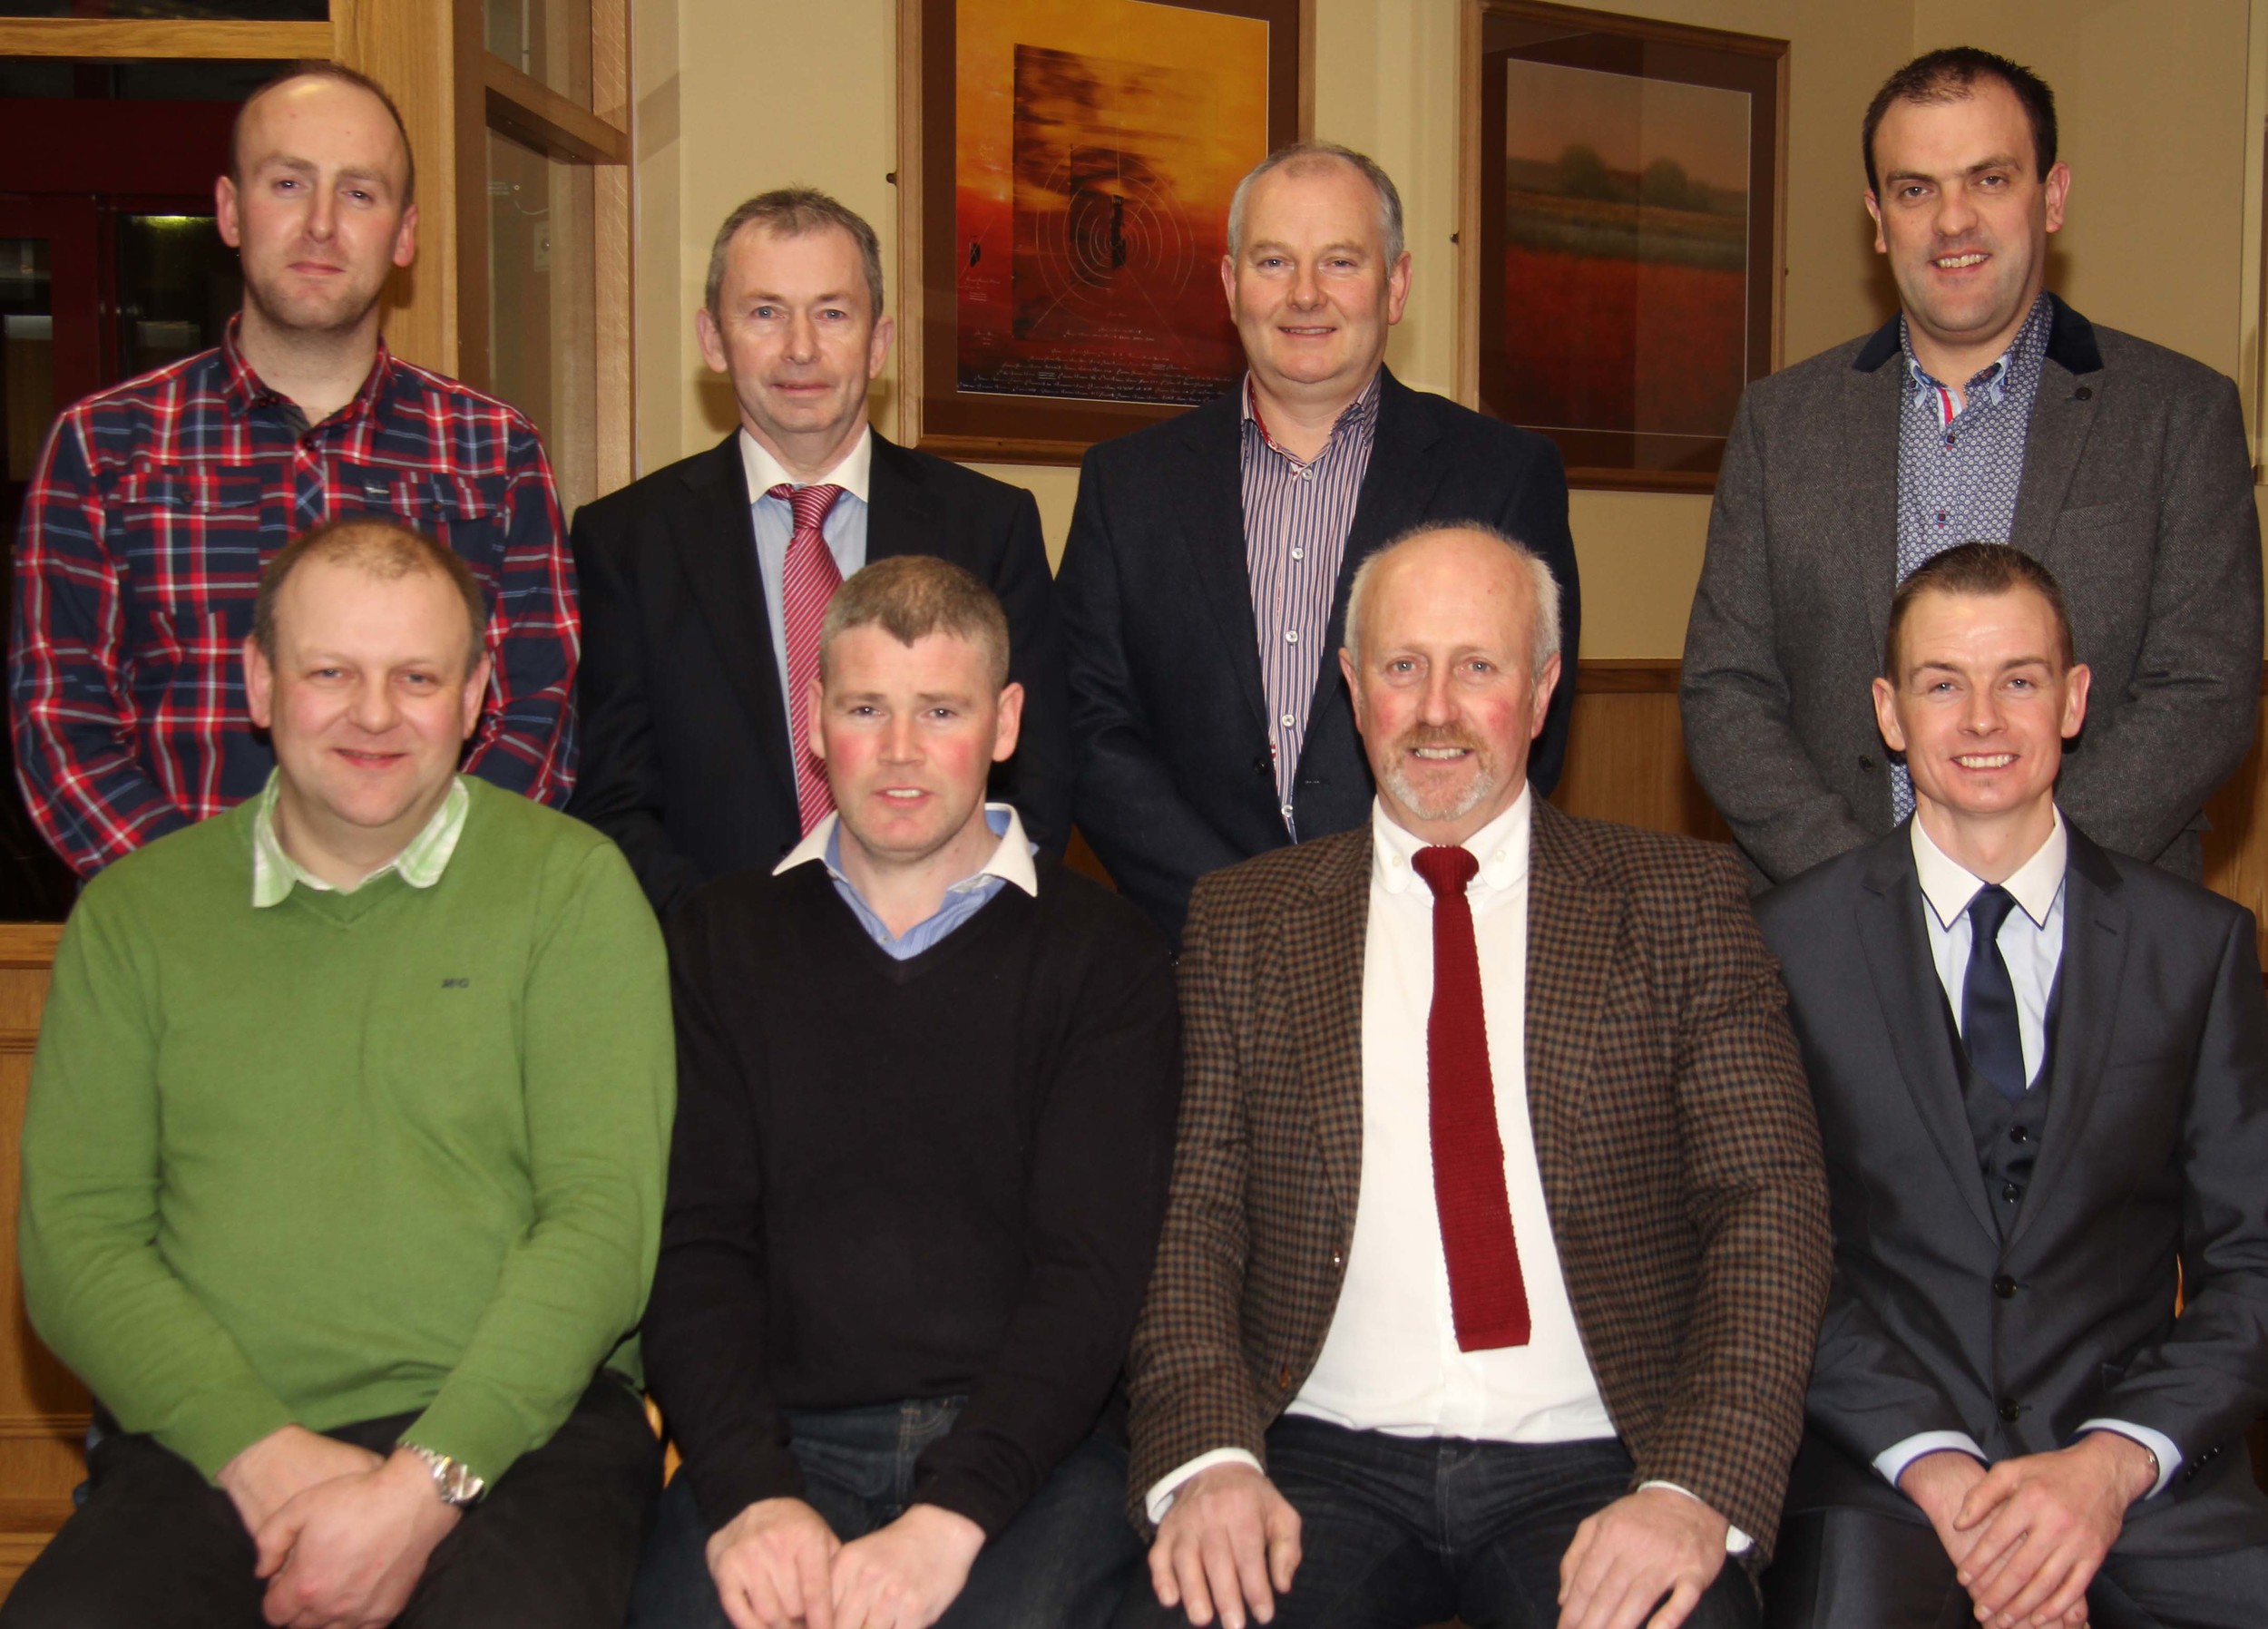 Vice-chairman Matthew Cunning, front left, and chairman Richard Rodgers, right, are pictured with guests at the NI Simmental Cattle Breeders' Club annual dinner, Dungannon. They include: Eamon McCloskey, Woodcraft Kitchens; Nigel Glasgow, Millburn Concrete; Neill Acheson, Animax; Andrew Tecey, Danske Bank; Francis Connon, Connon General Merchants; and Ian Cummins, Irwin Feeds.